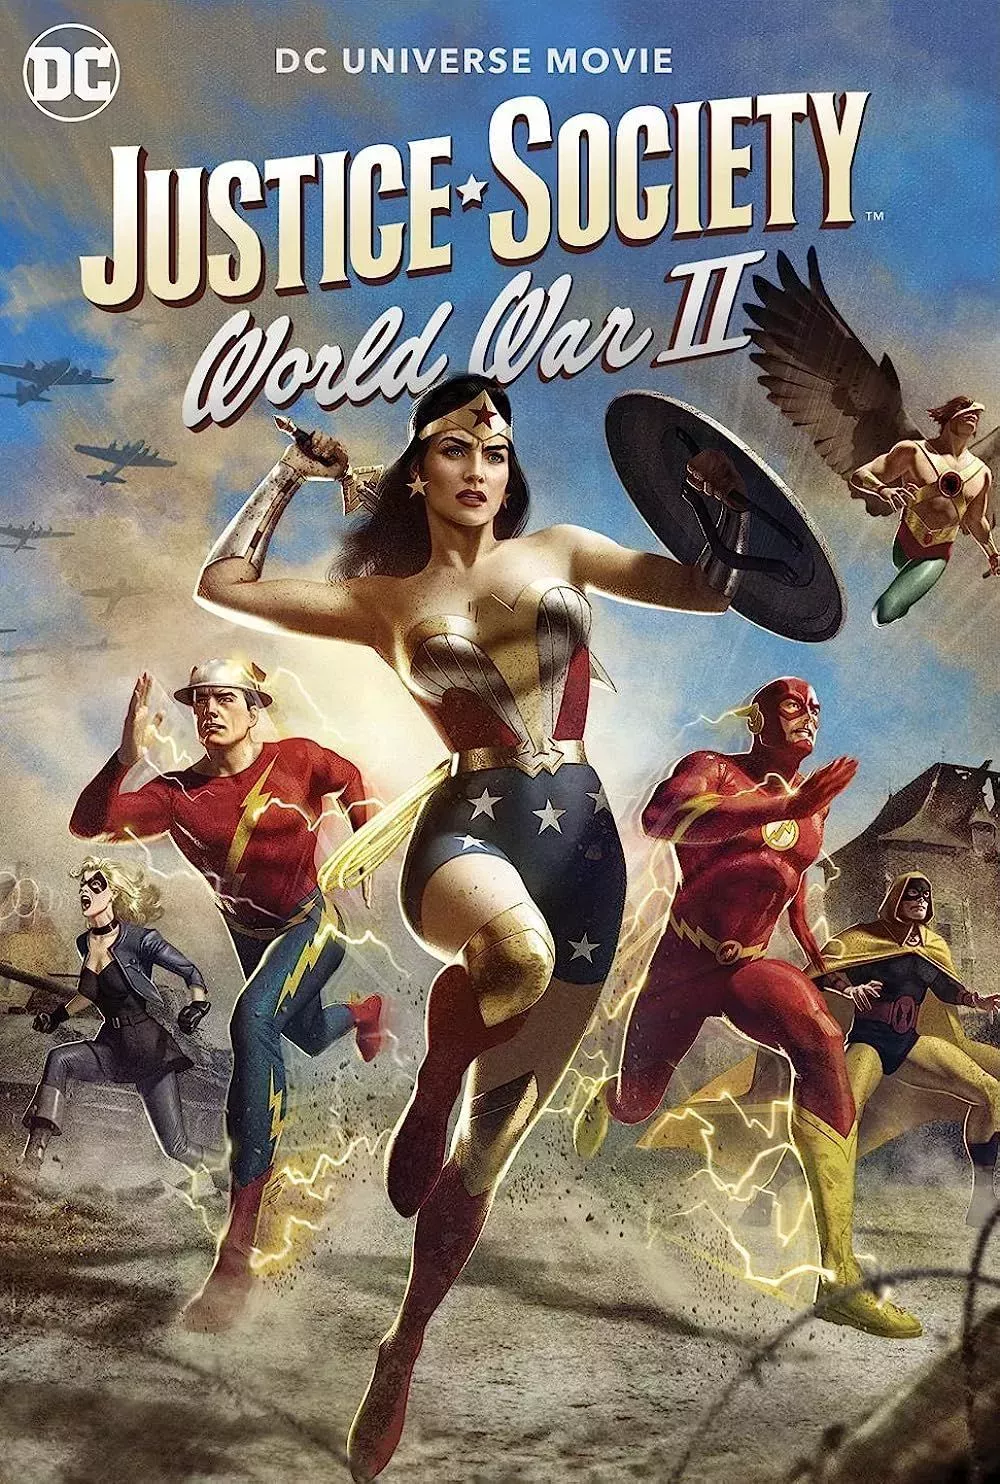 The Justice Society and Barry Allen led by Wonder Woman on the cover of Justice Society World War II